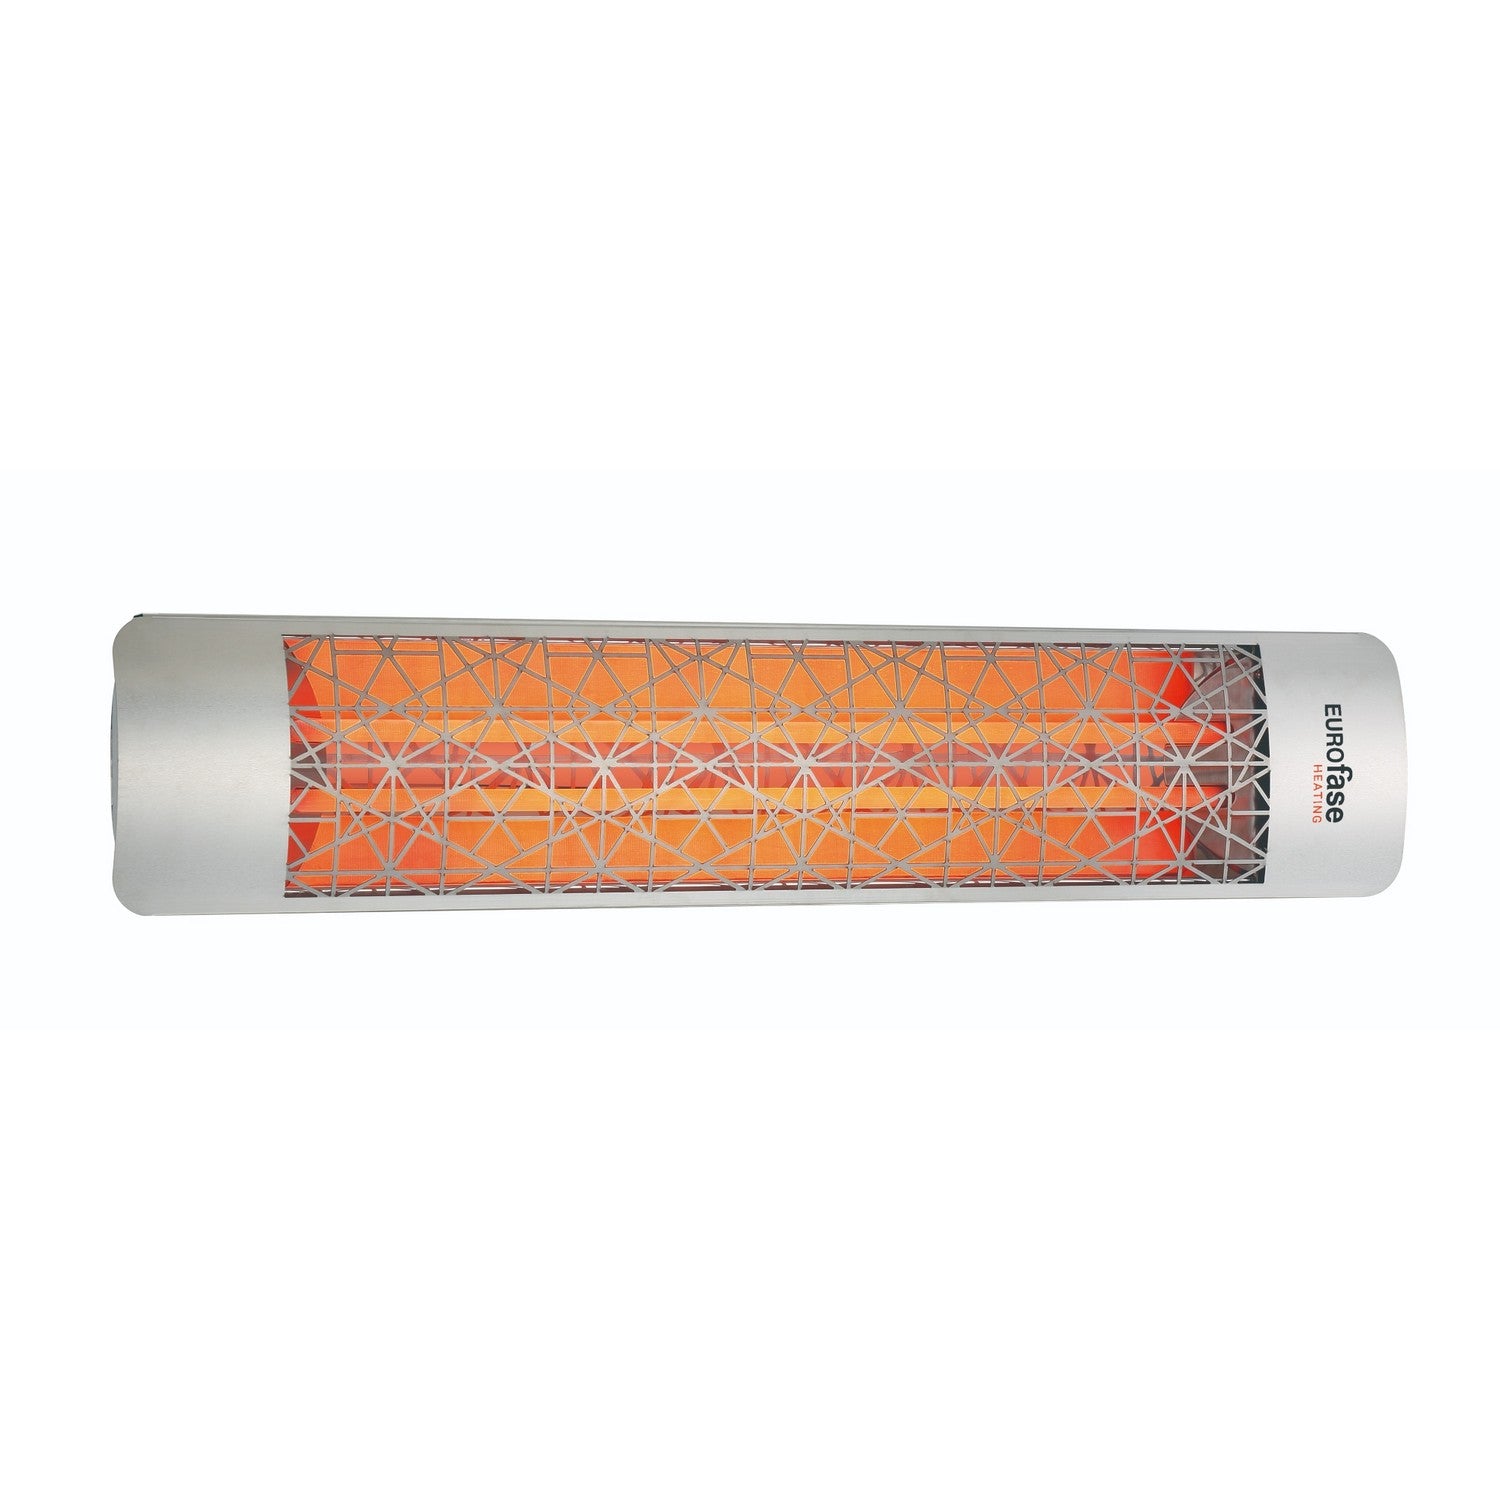 Eurofase - EF40480S4 - Electric Heater - Stainless Steel